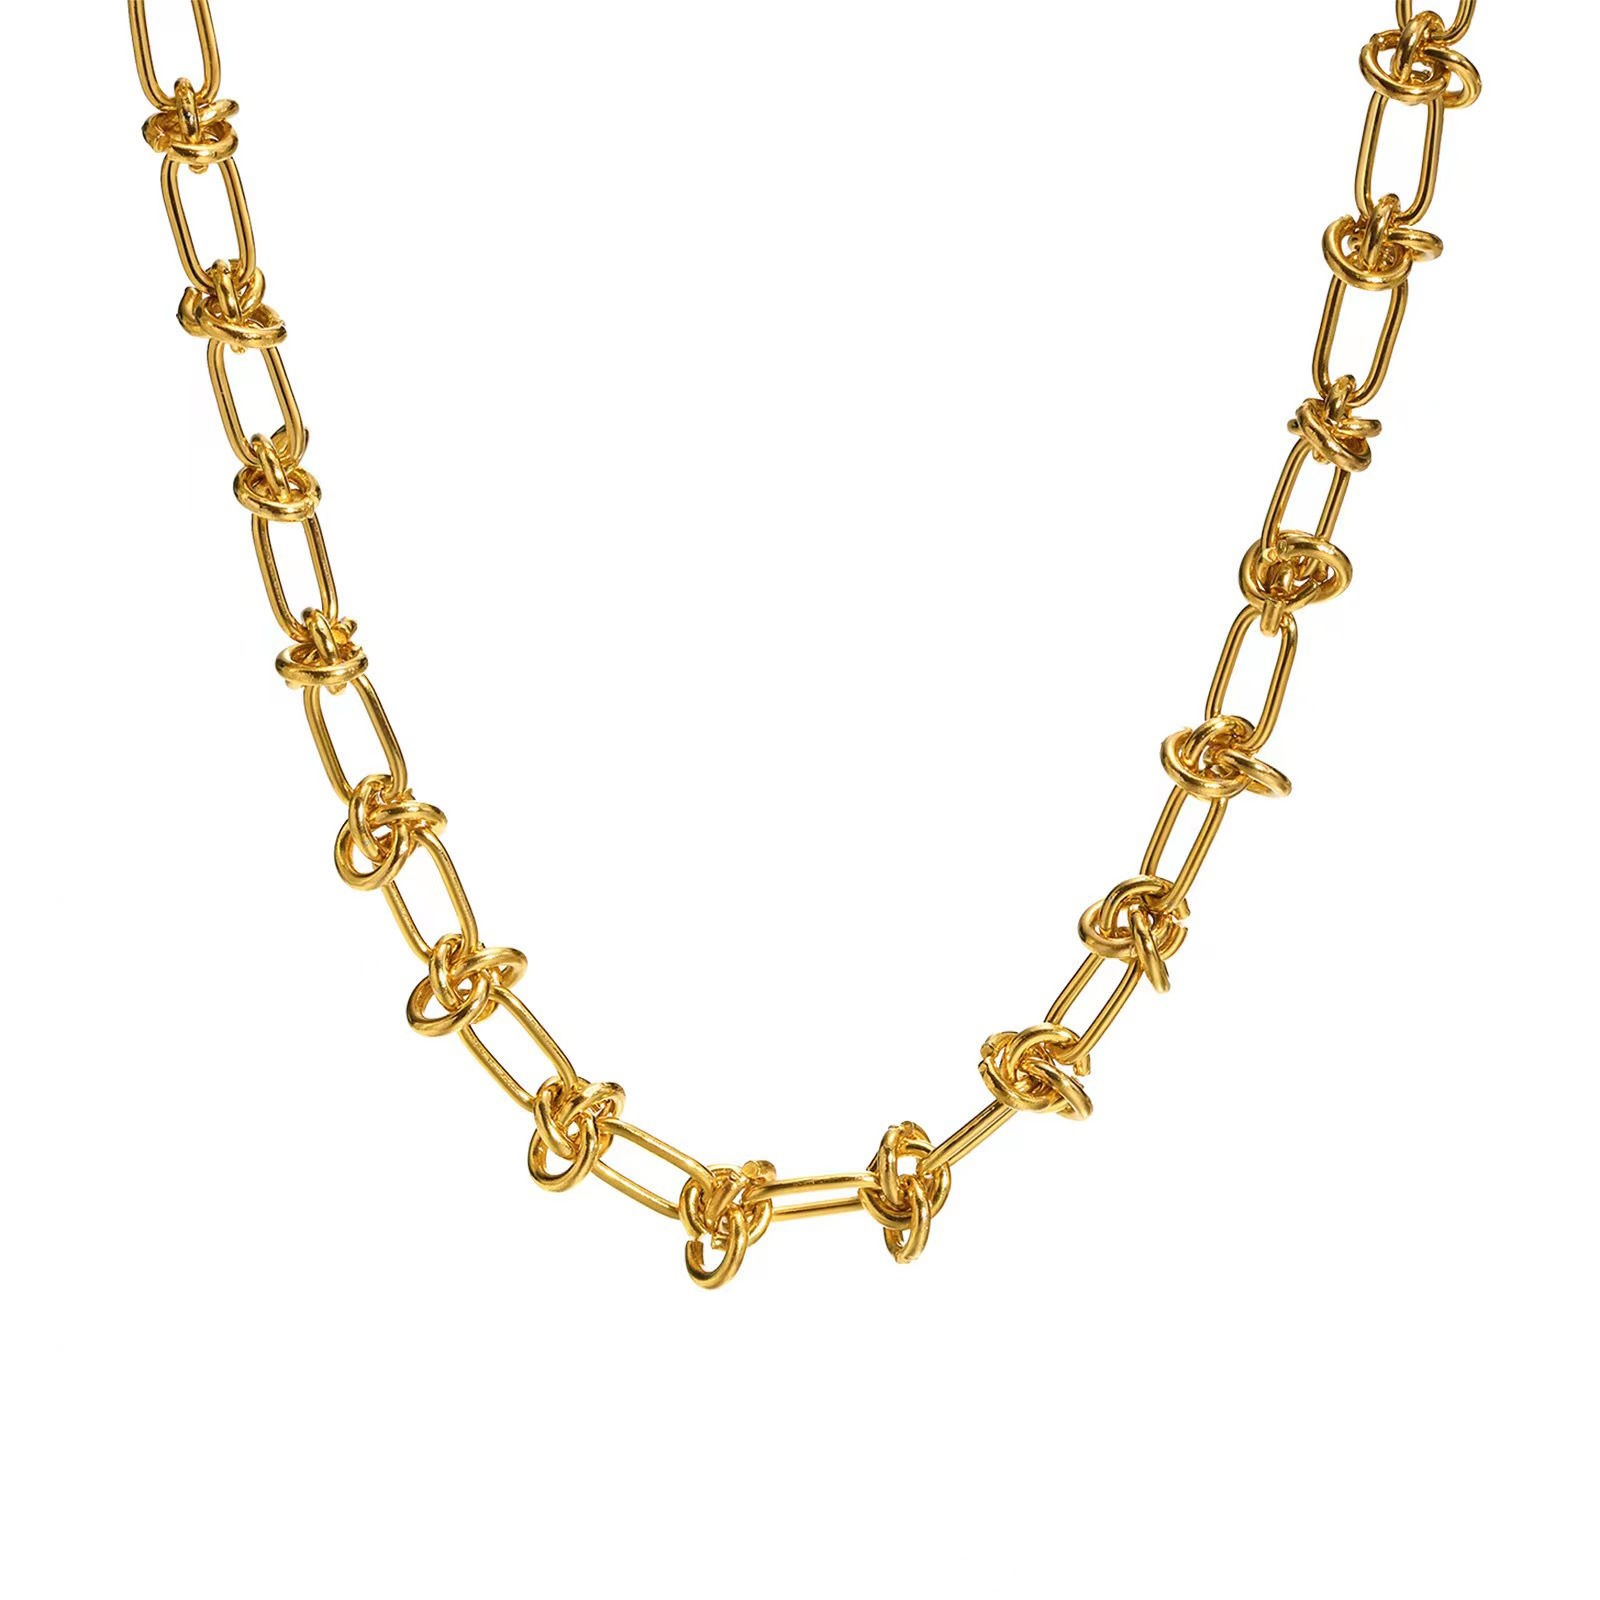 18K gold plated Stainless steel necklace, Intensity SKU #87381-0 ...